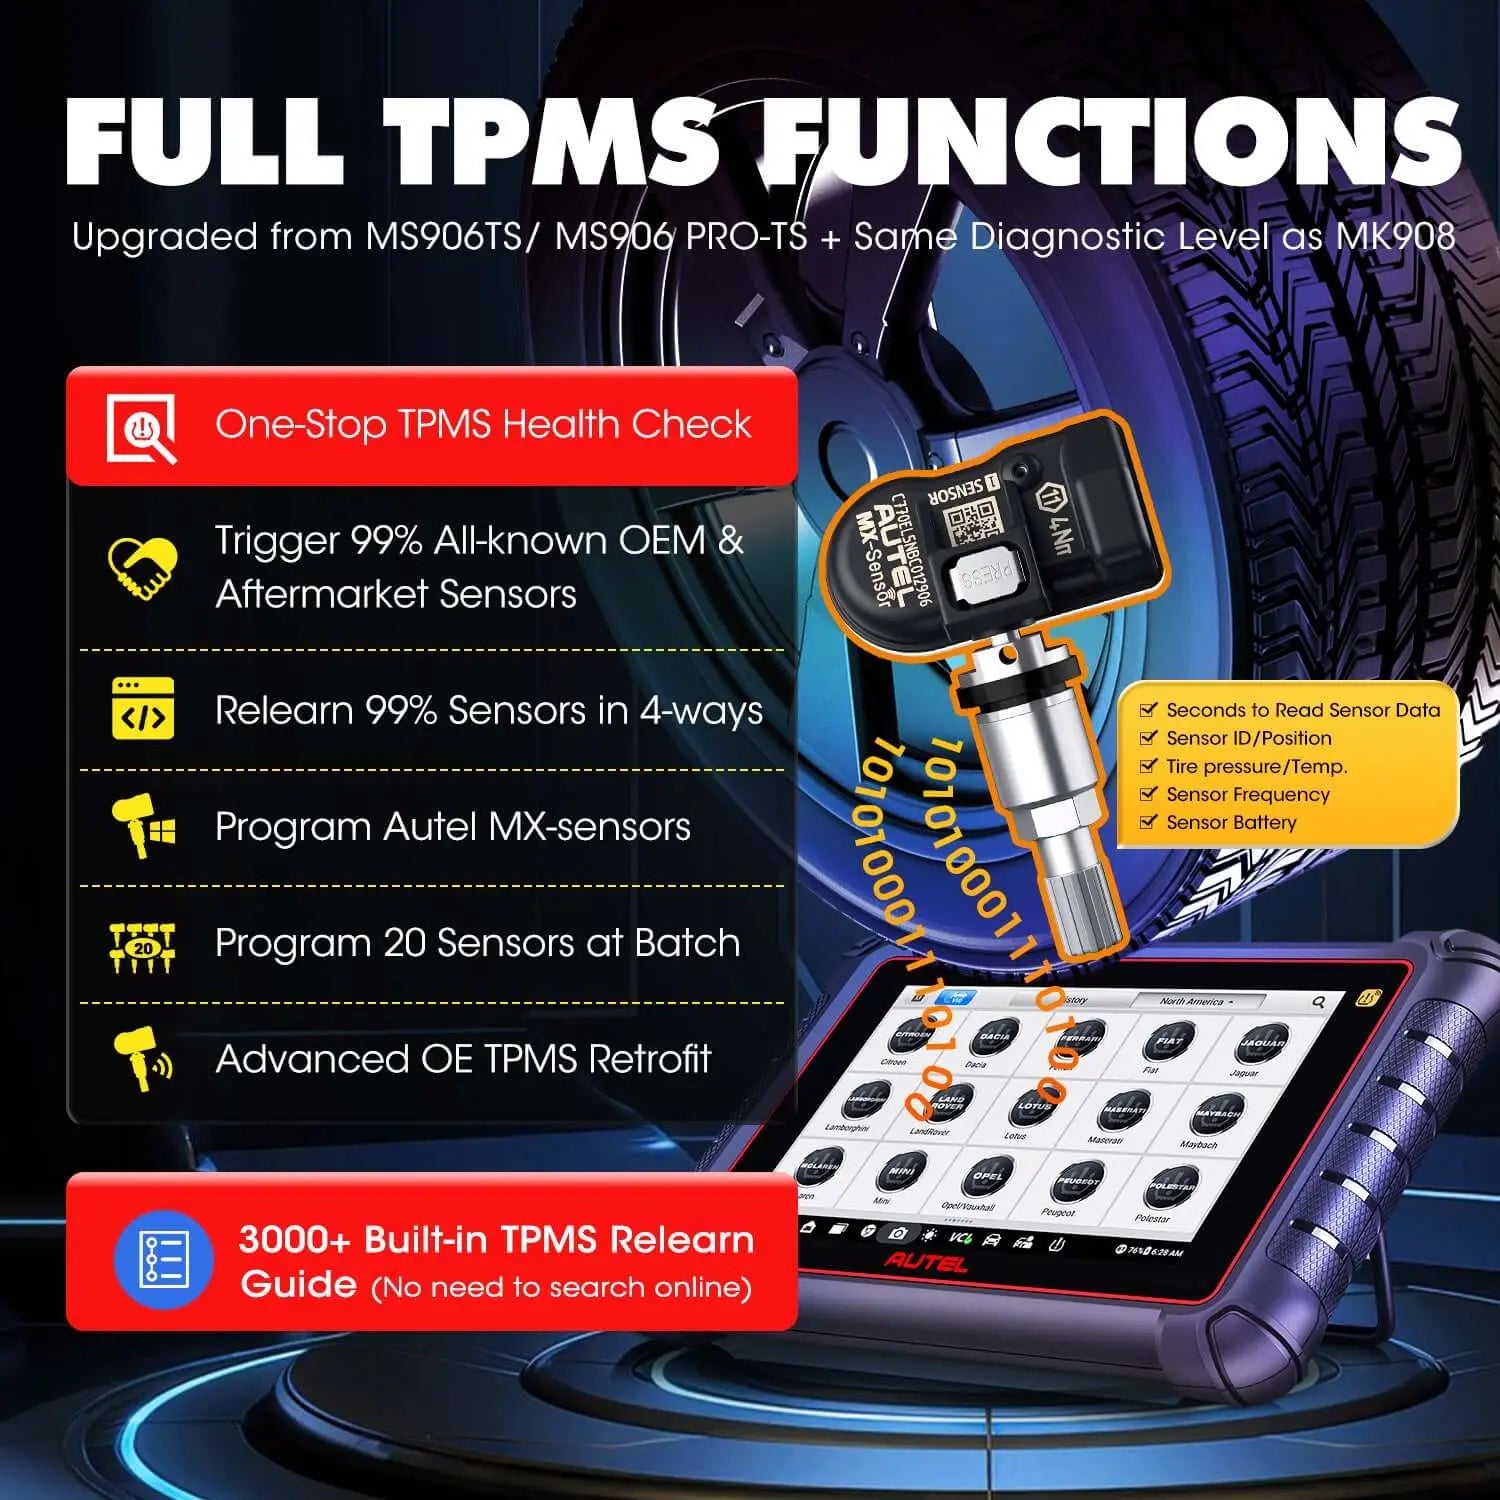 Full TPMS Functions MP900TS Diganostic Tool - Upgraded of MS906TS/MS906 PRO-TS + Same Dignostic Level as MK908